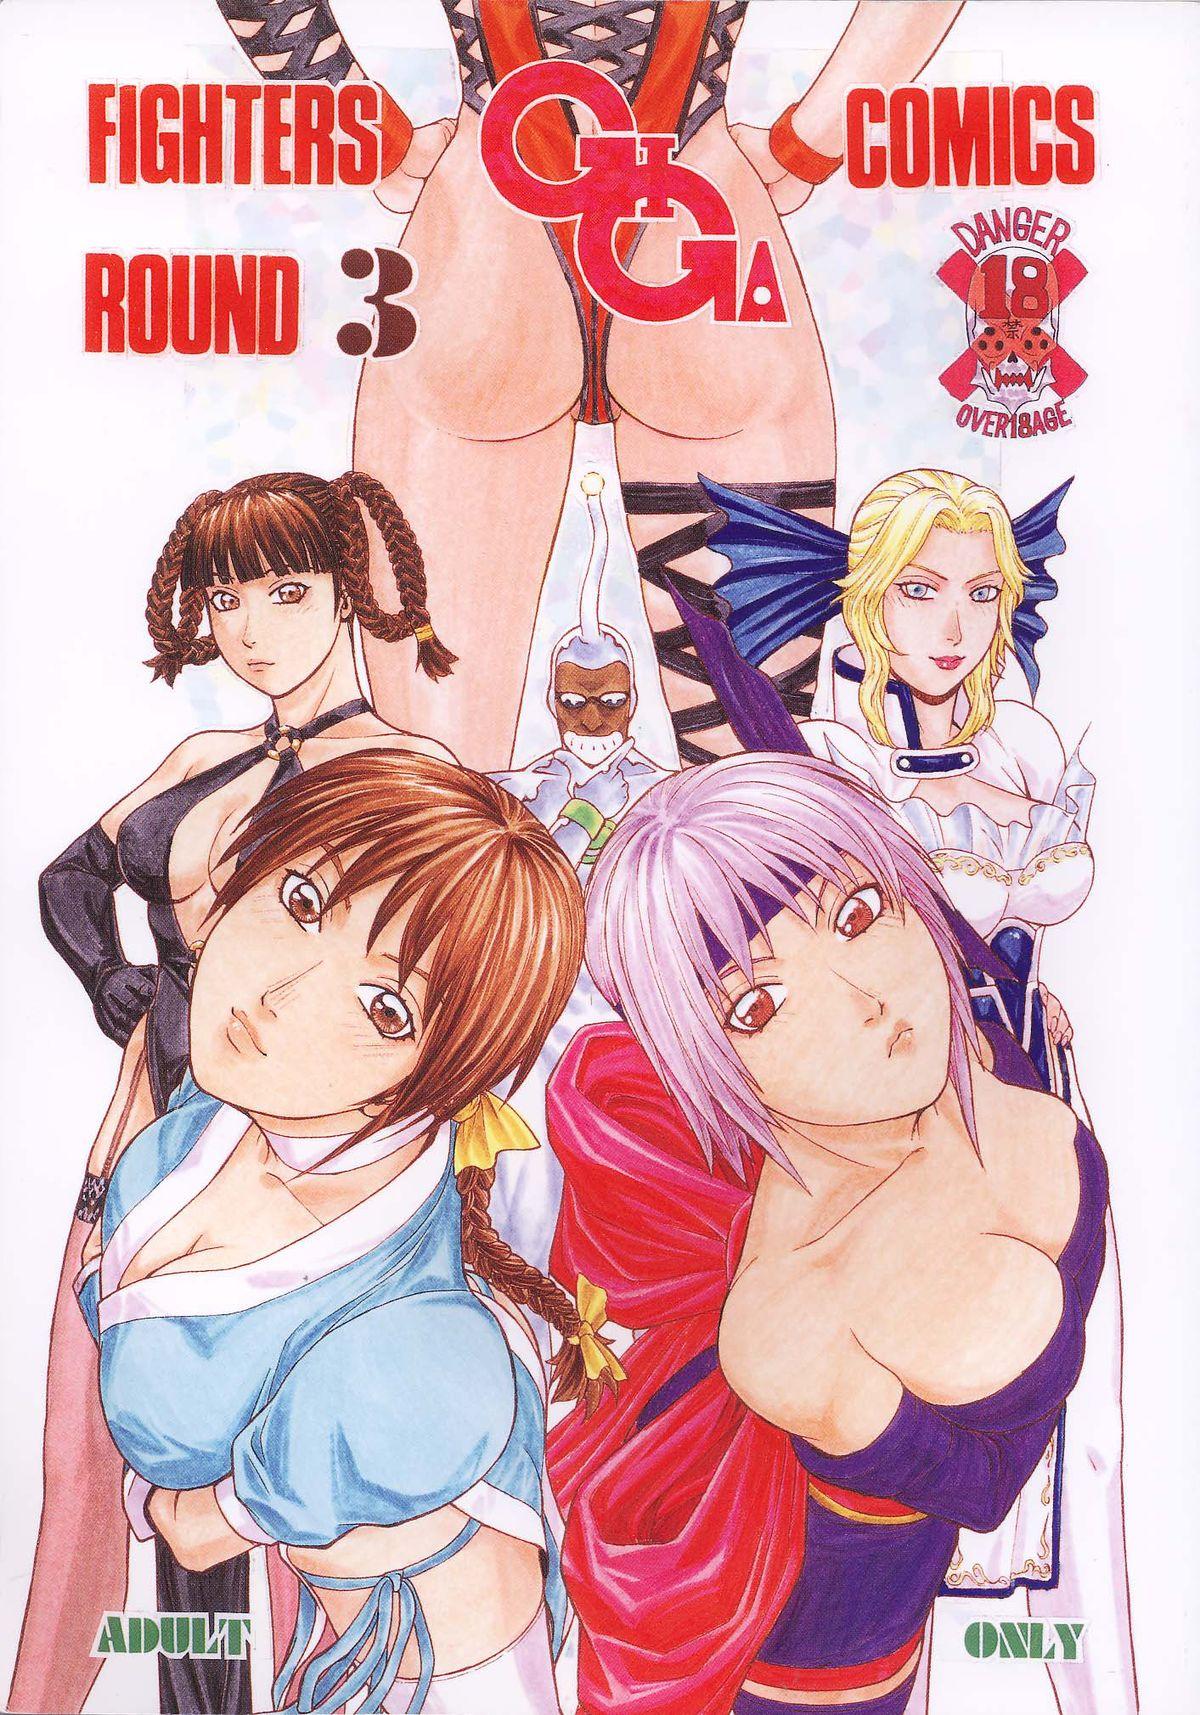 Passionate Fighters Giga Comics Round 3 - Street fighter Dead or alive Soulcalibur Naughty - Picture 1